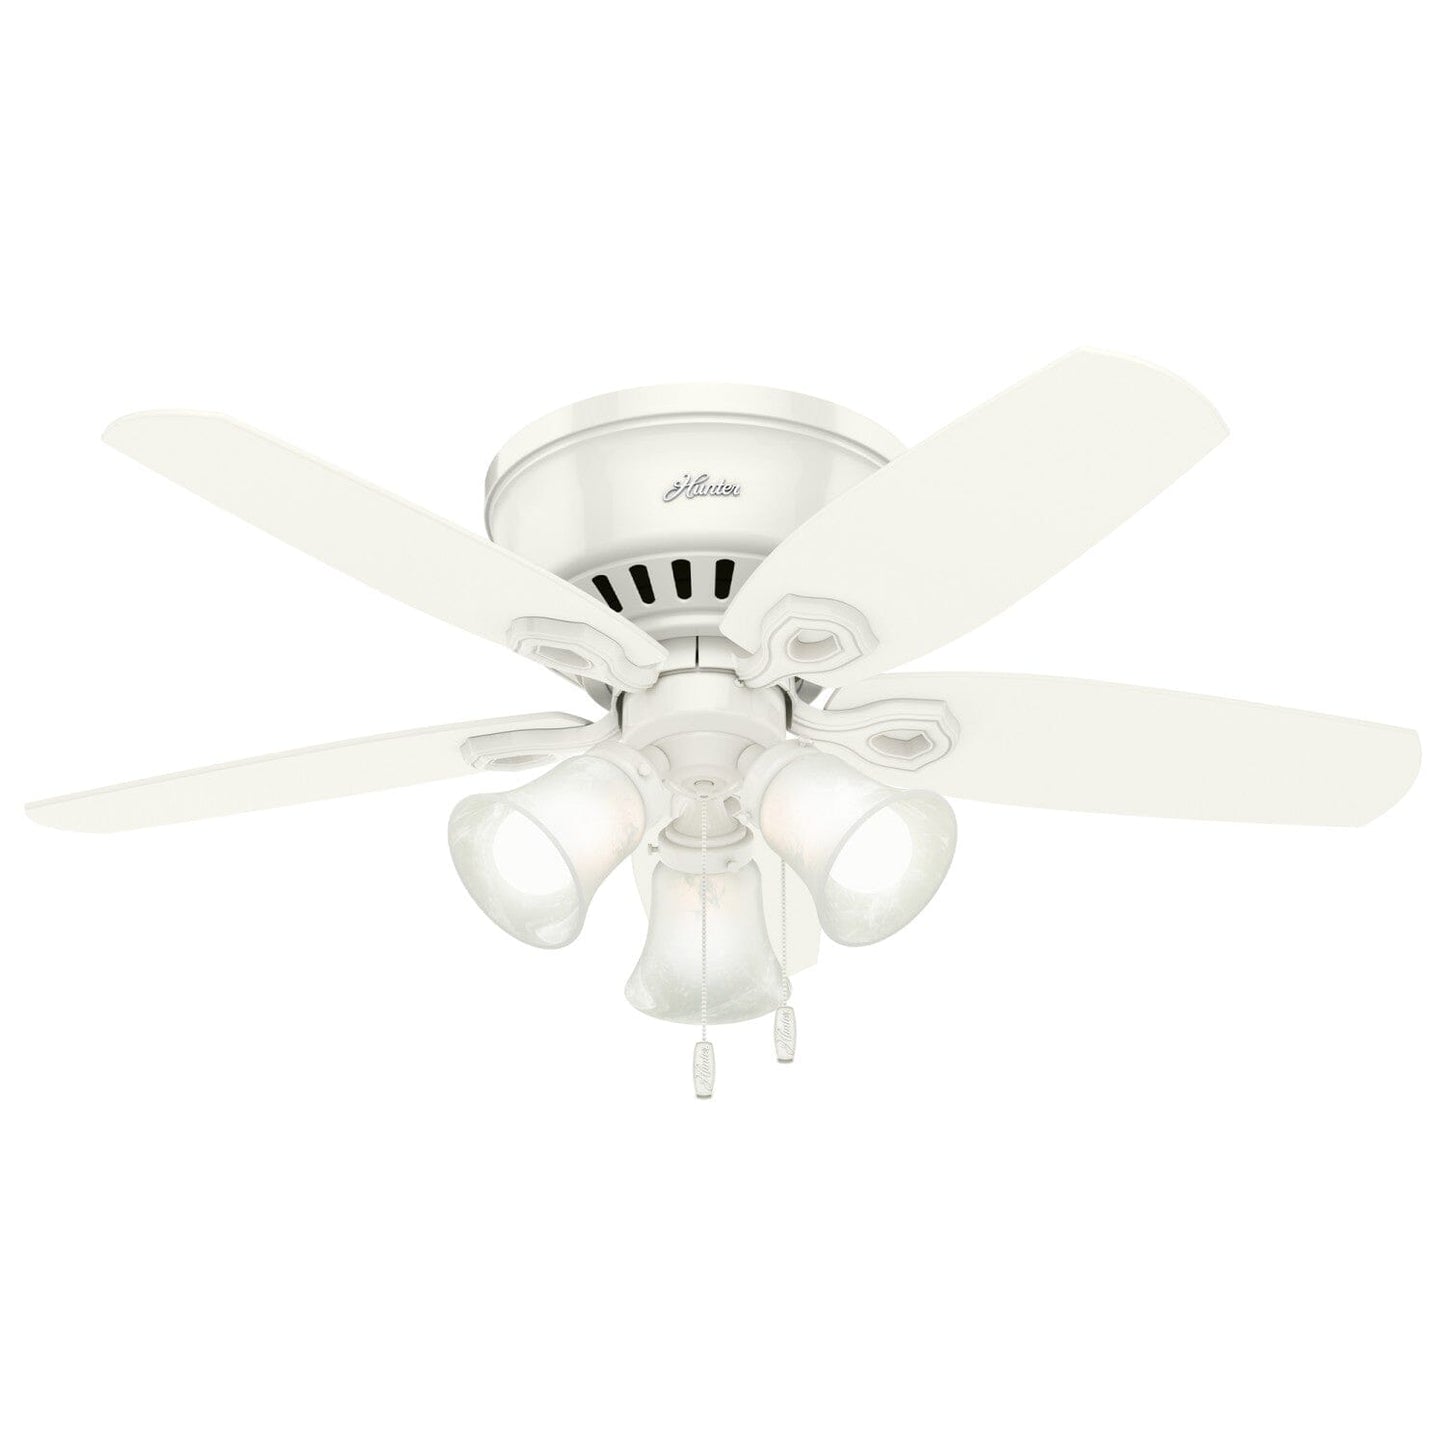 Builder Low Profile Swirled Marble with 3 Lights 42 inch Ceiling Fans Hunter Snow White - Snow White 